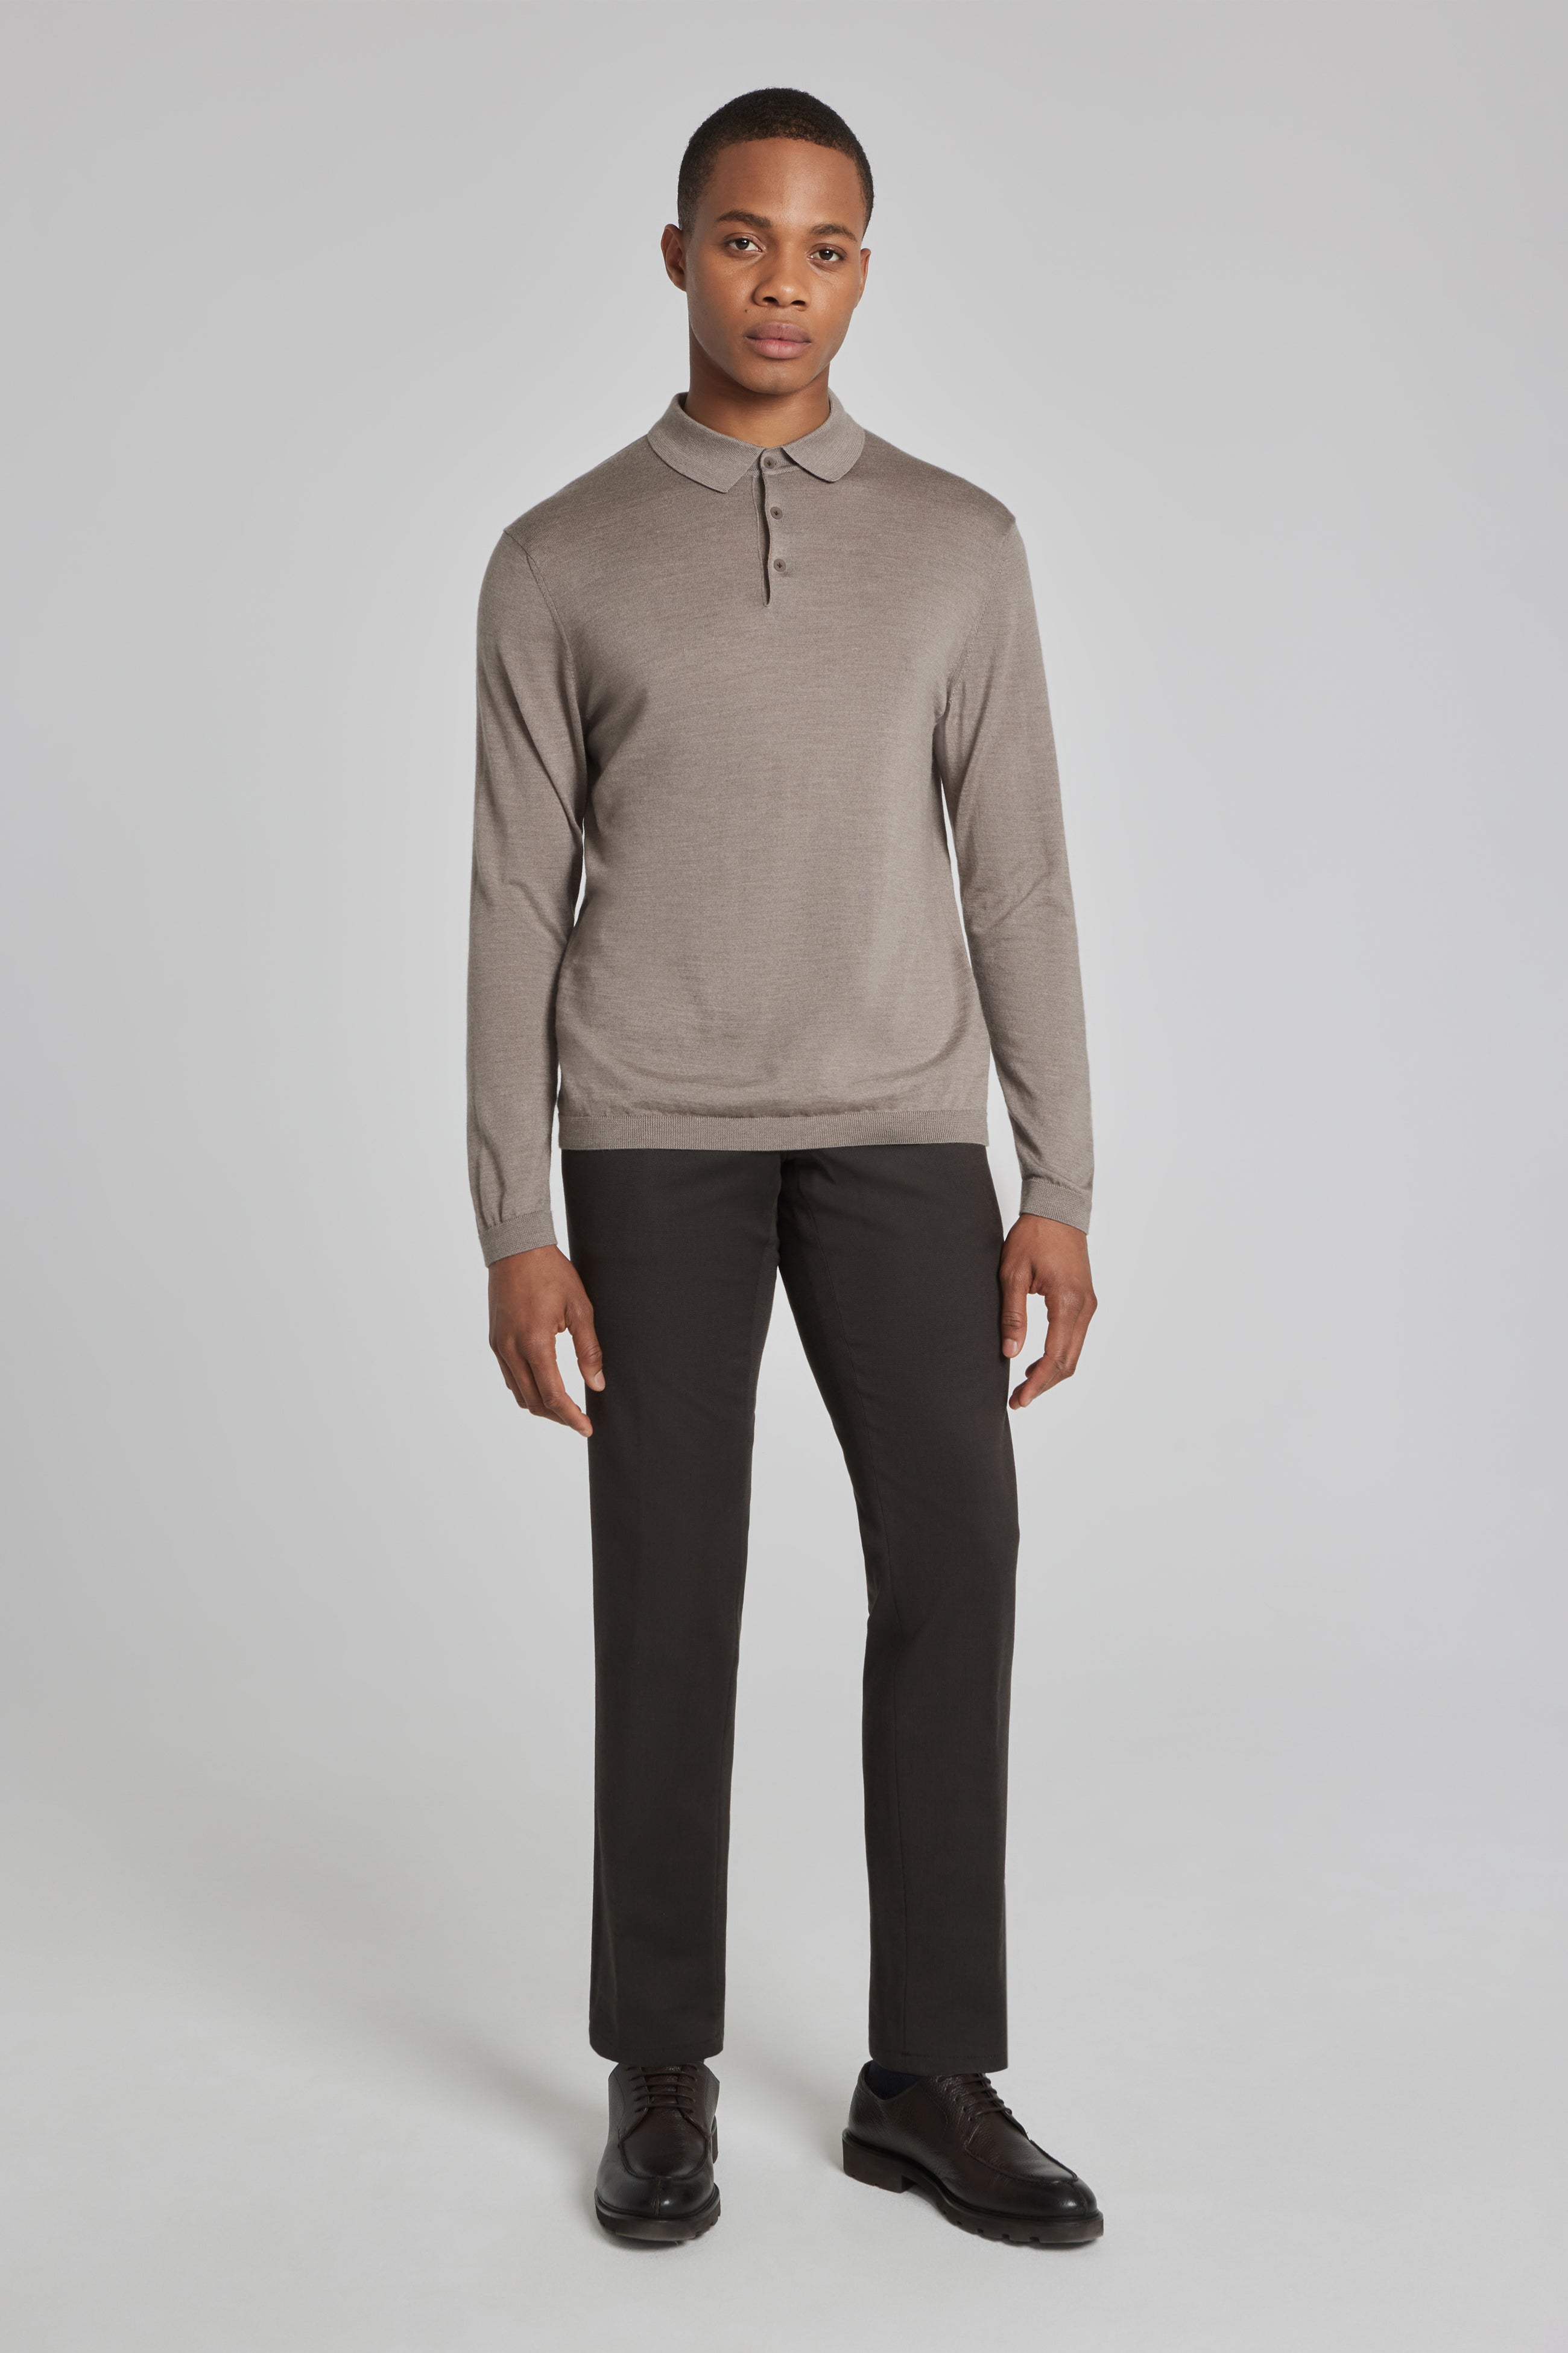 Redfern Tan Wool, Silk and Cashmere Long Sleeve Polo